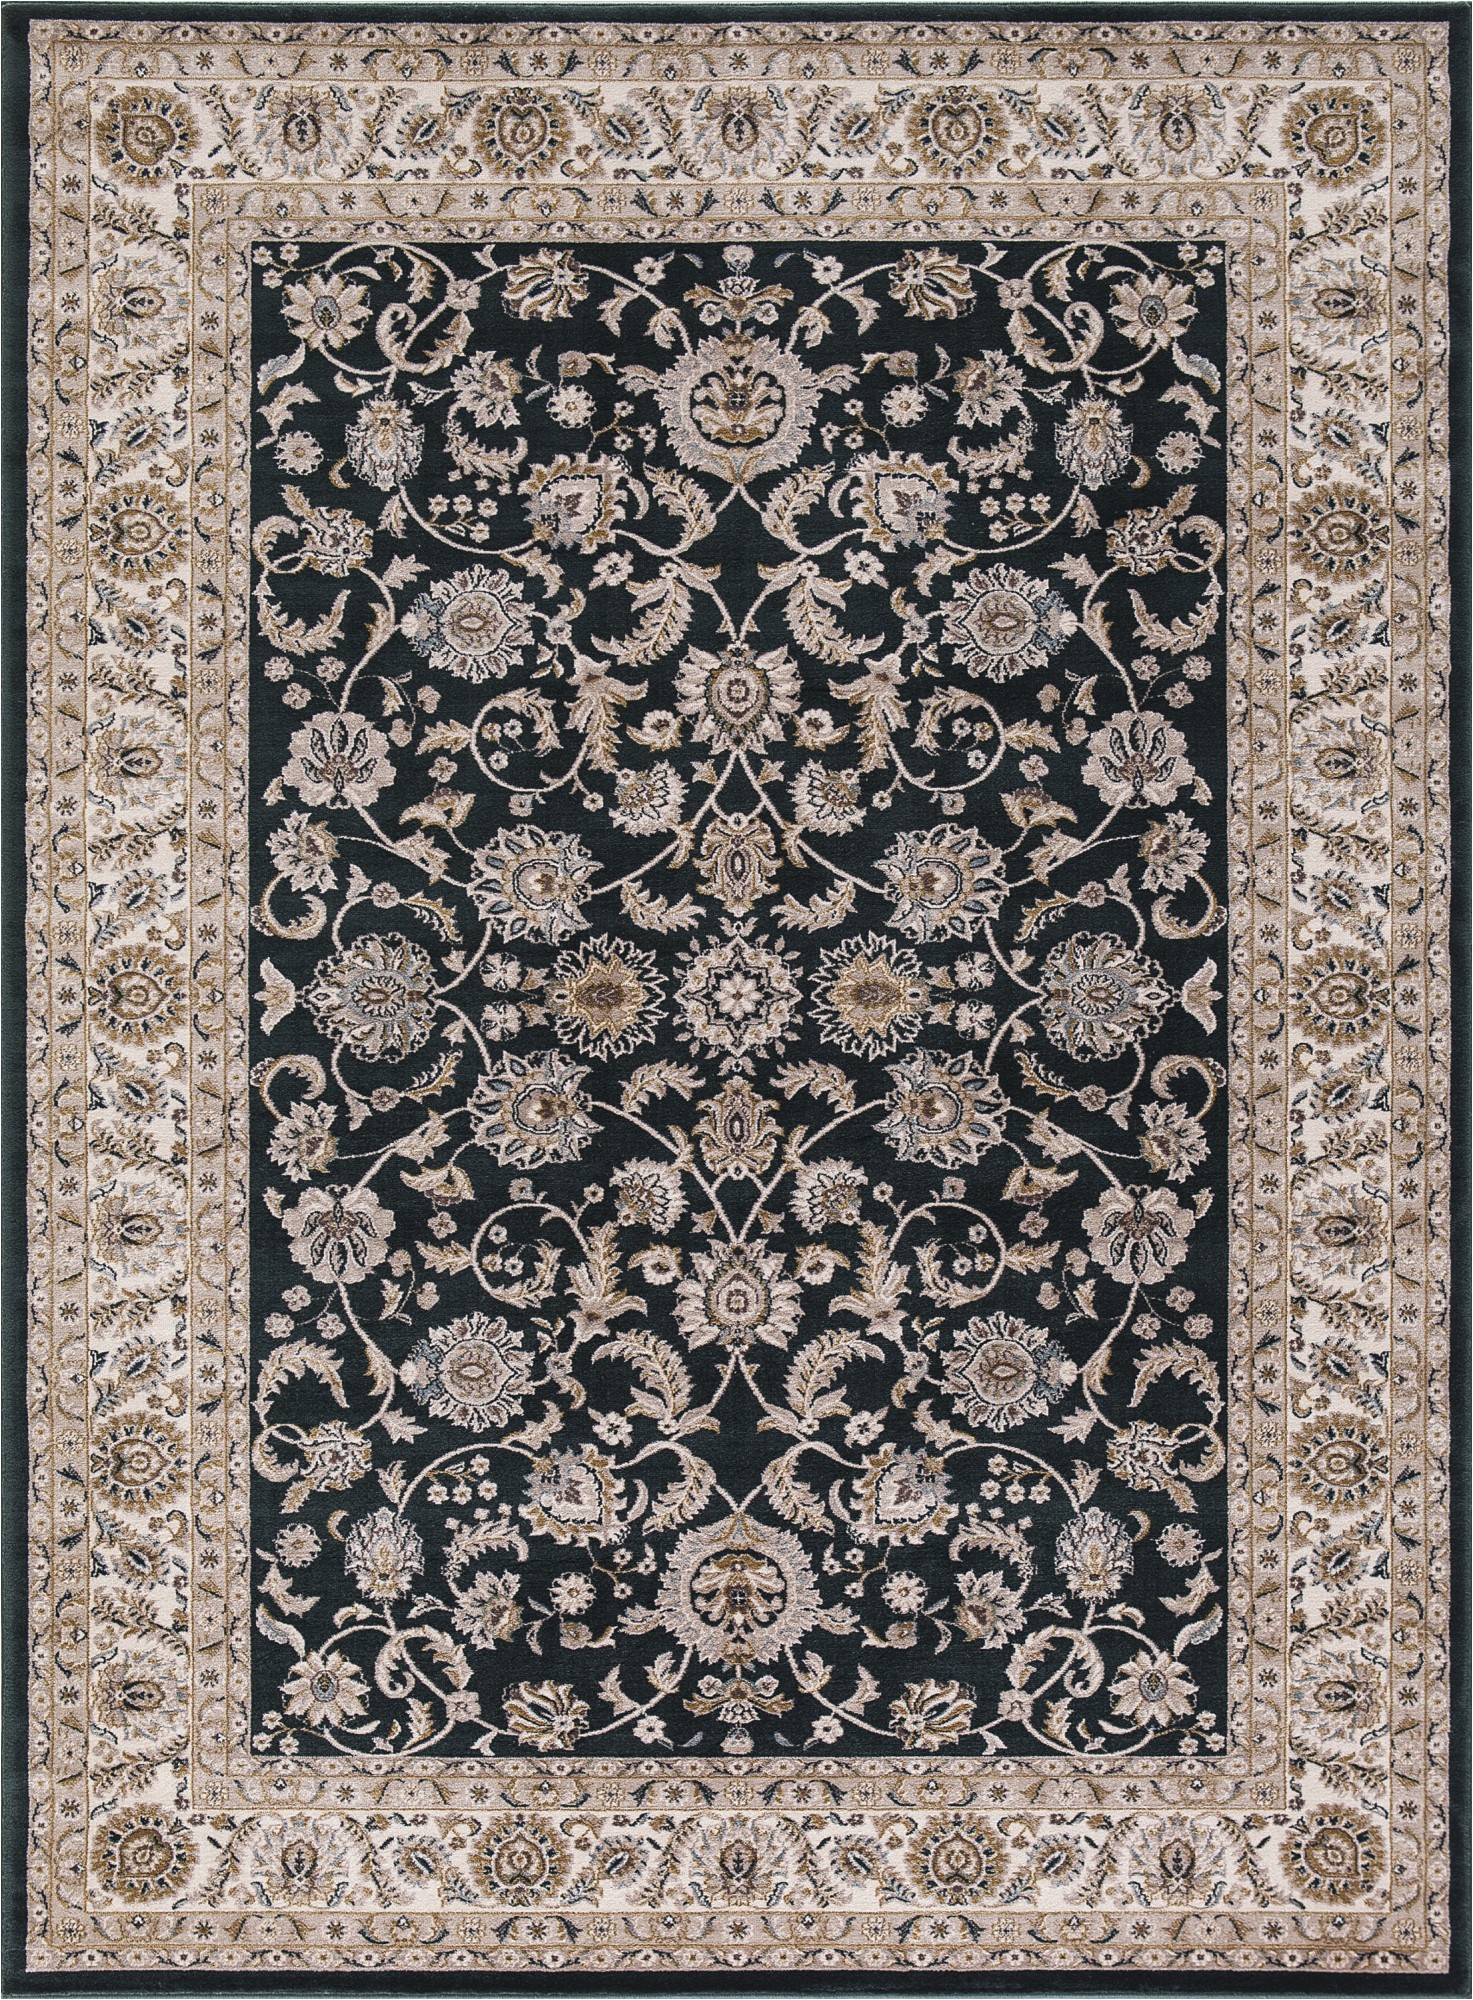 Concord Global Trading area Rugs Concord Global Trading Kashan Collection Bergama area Rug Walmart